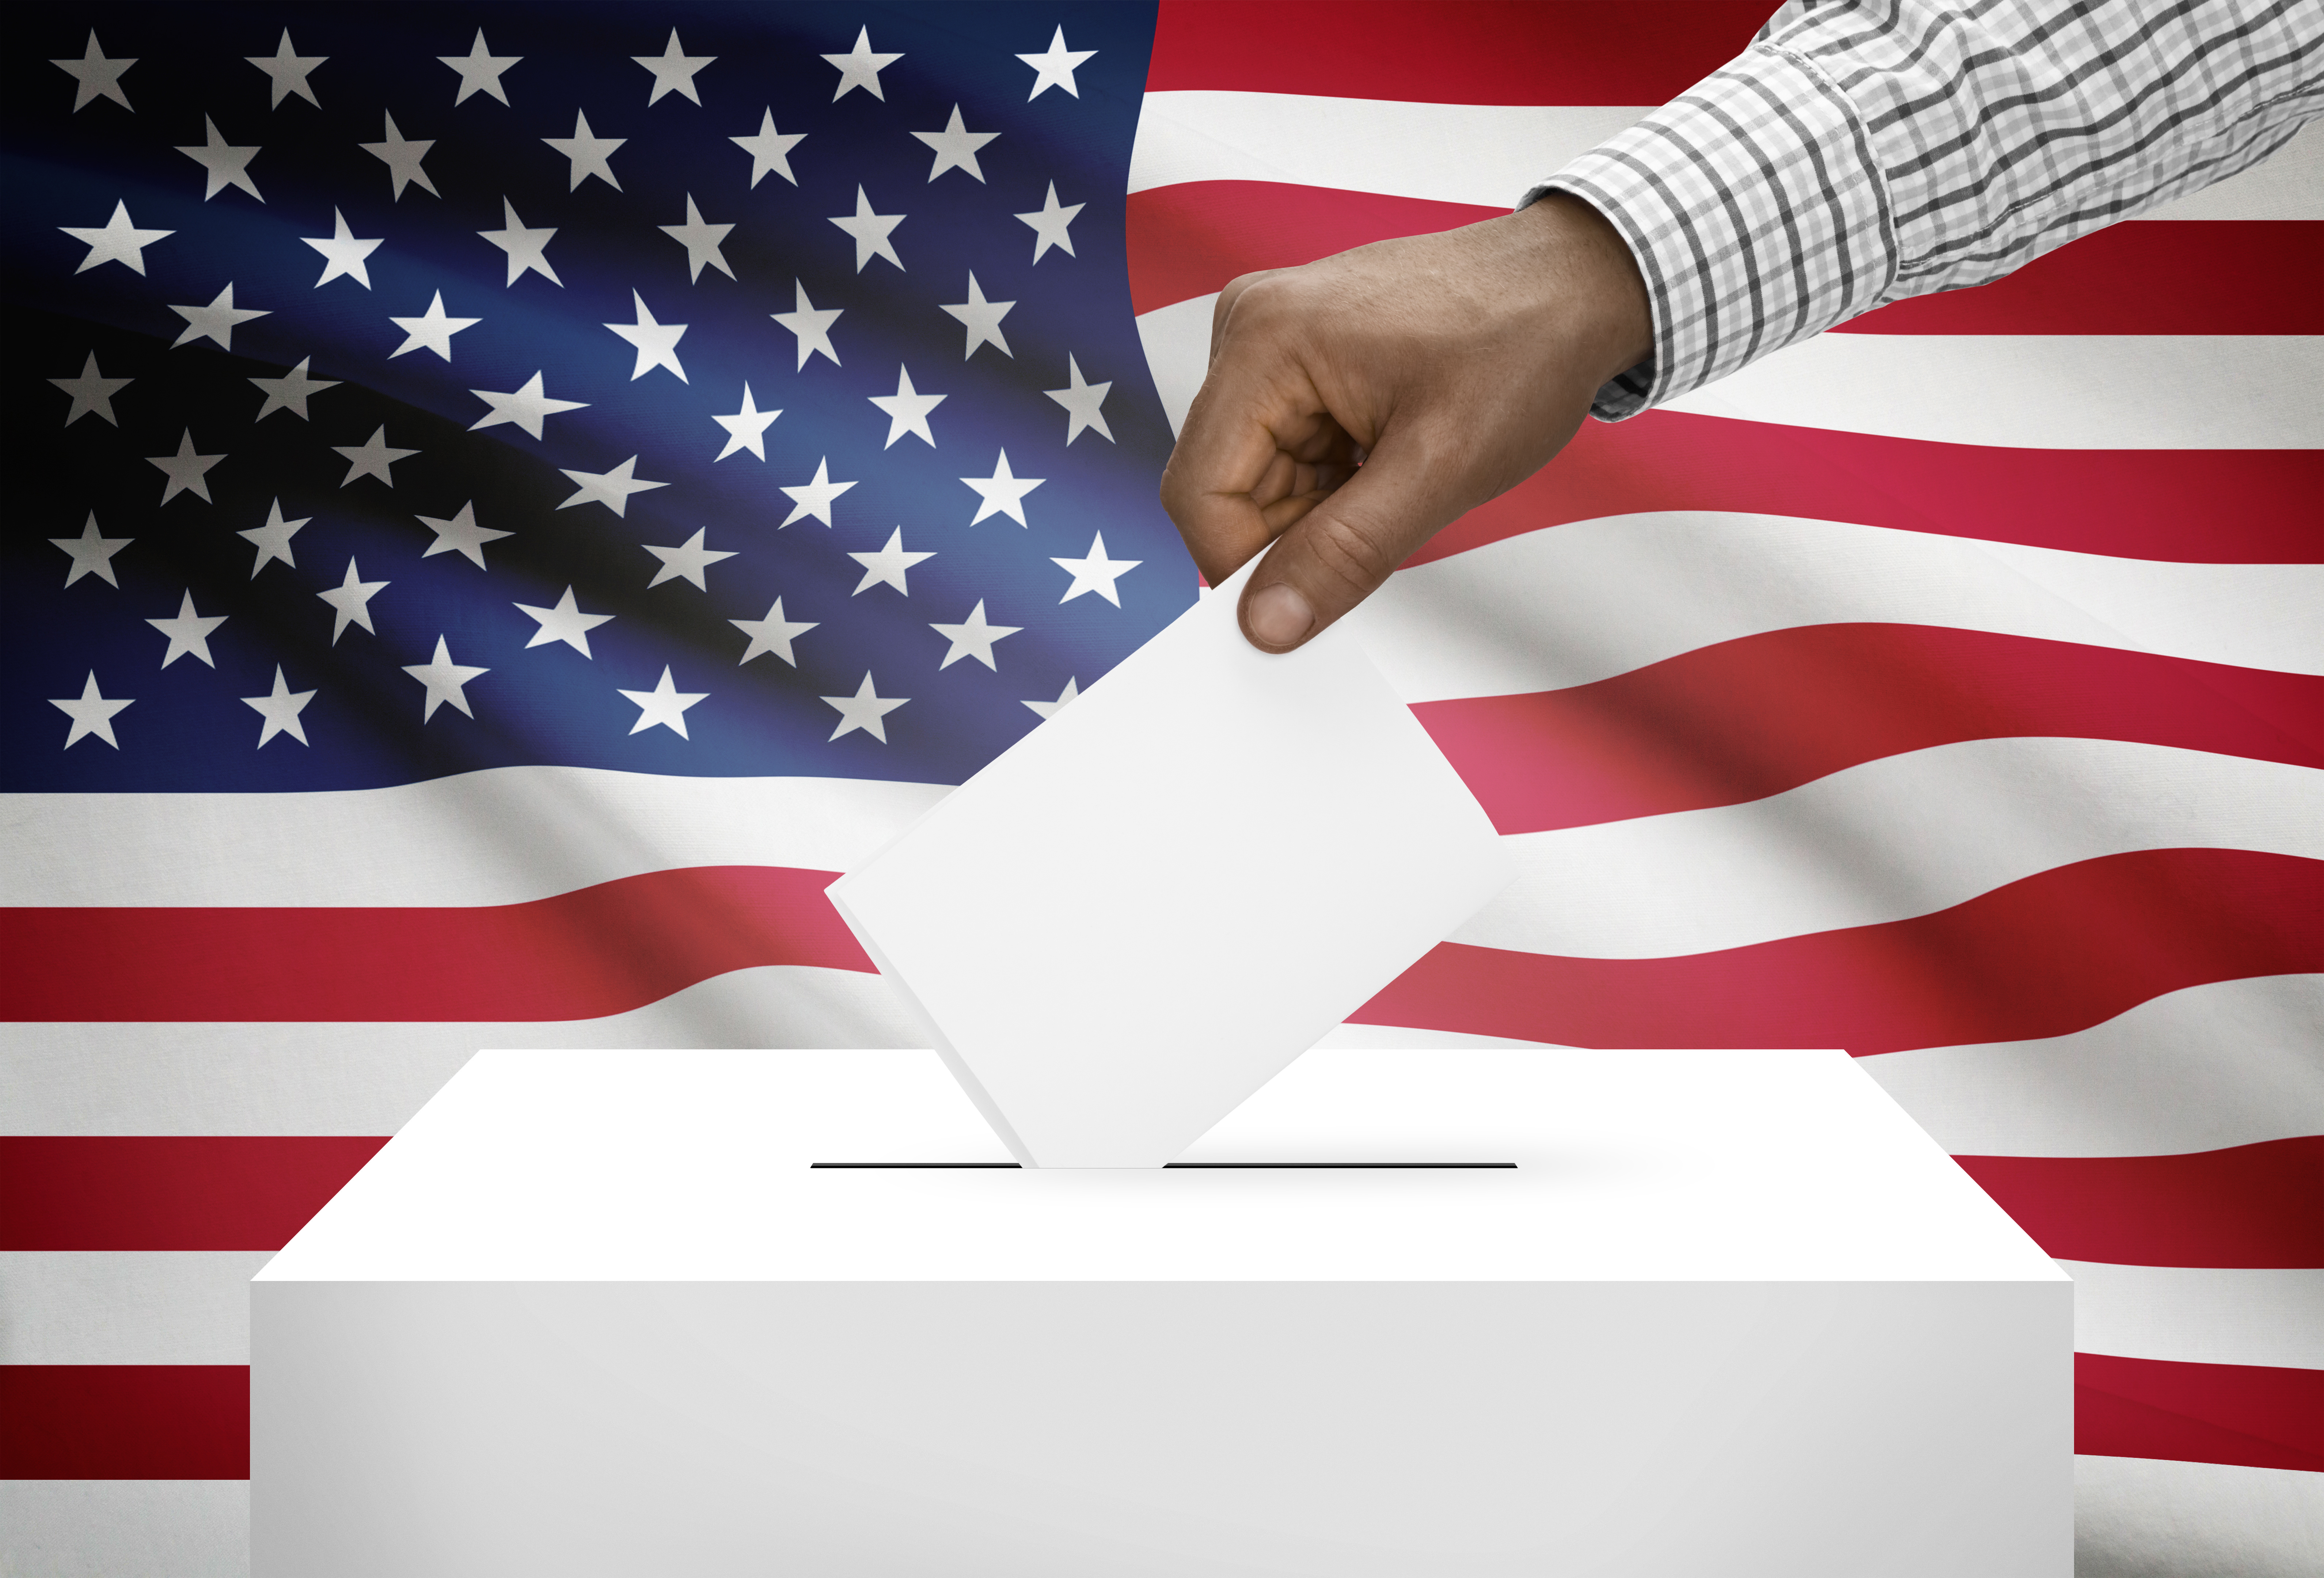 Hand and arm of person placing white paper ballot into white ballot box with American flag in background.